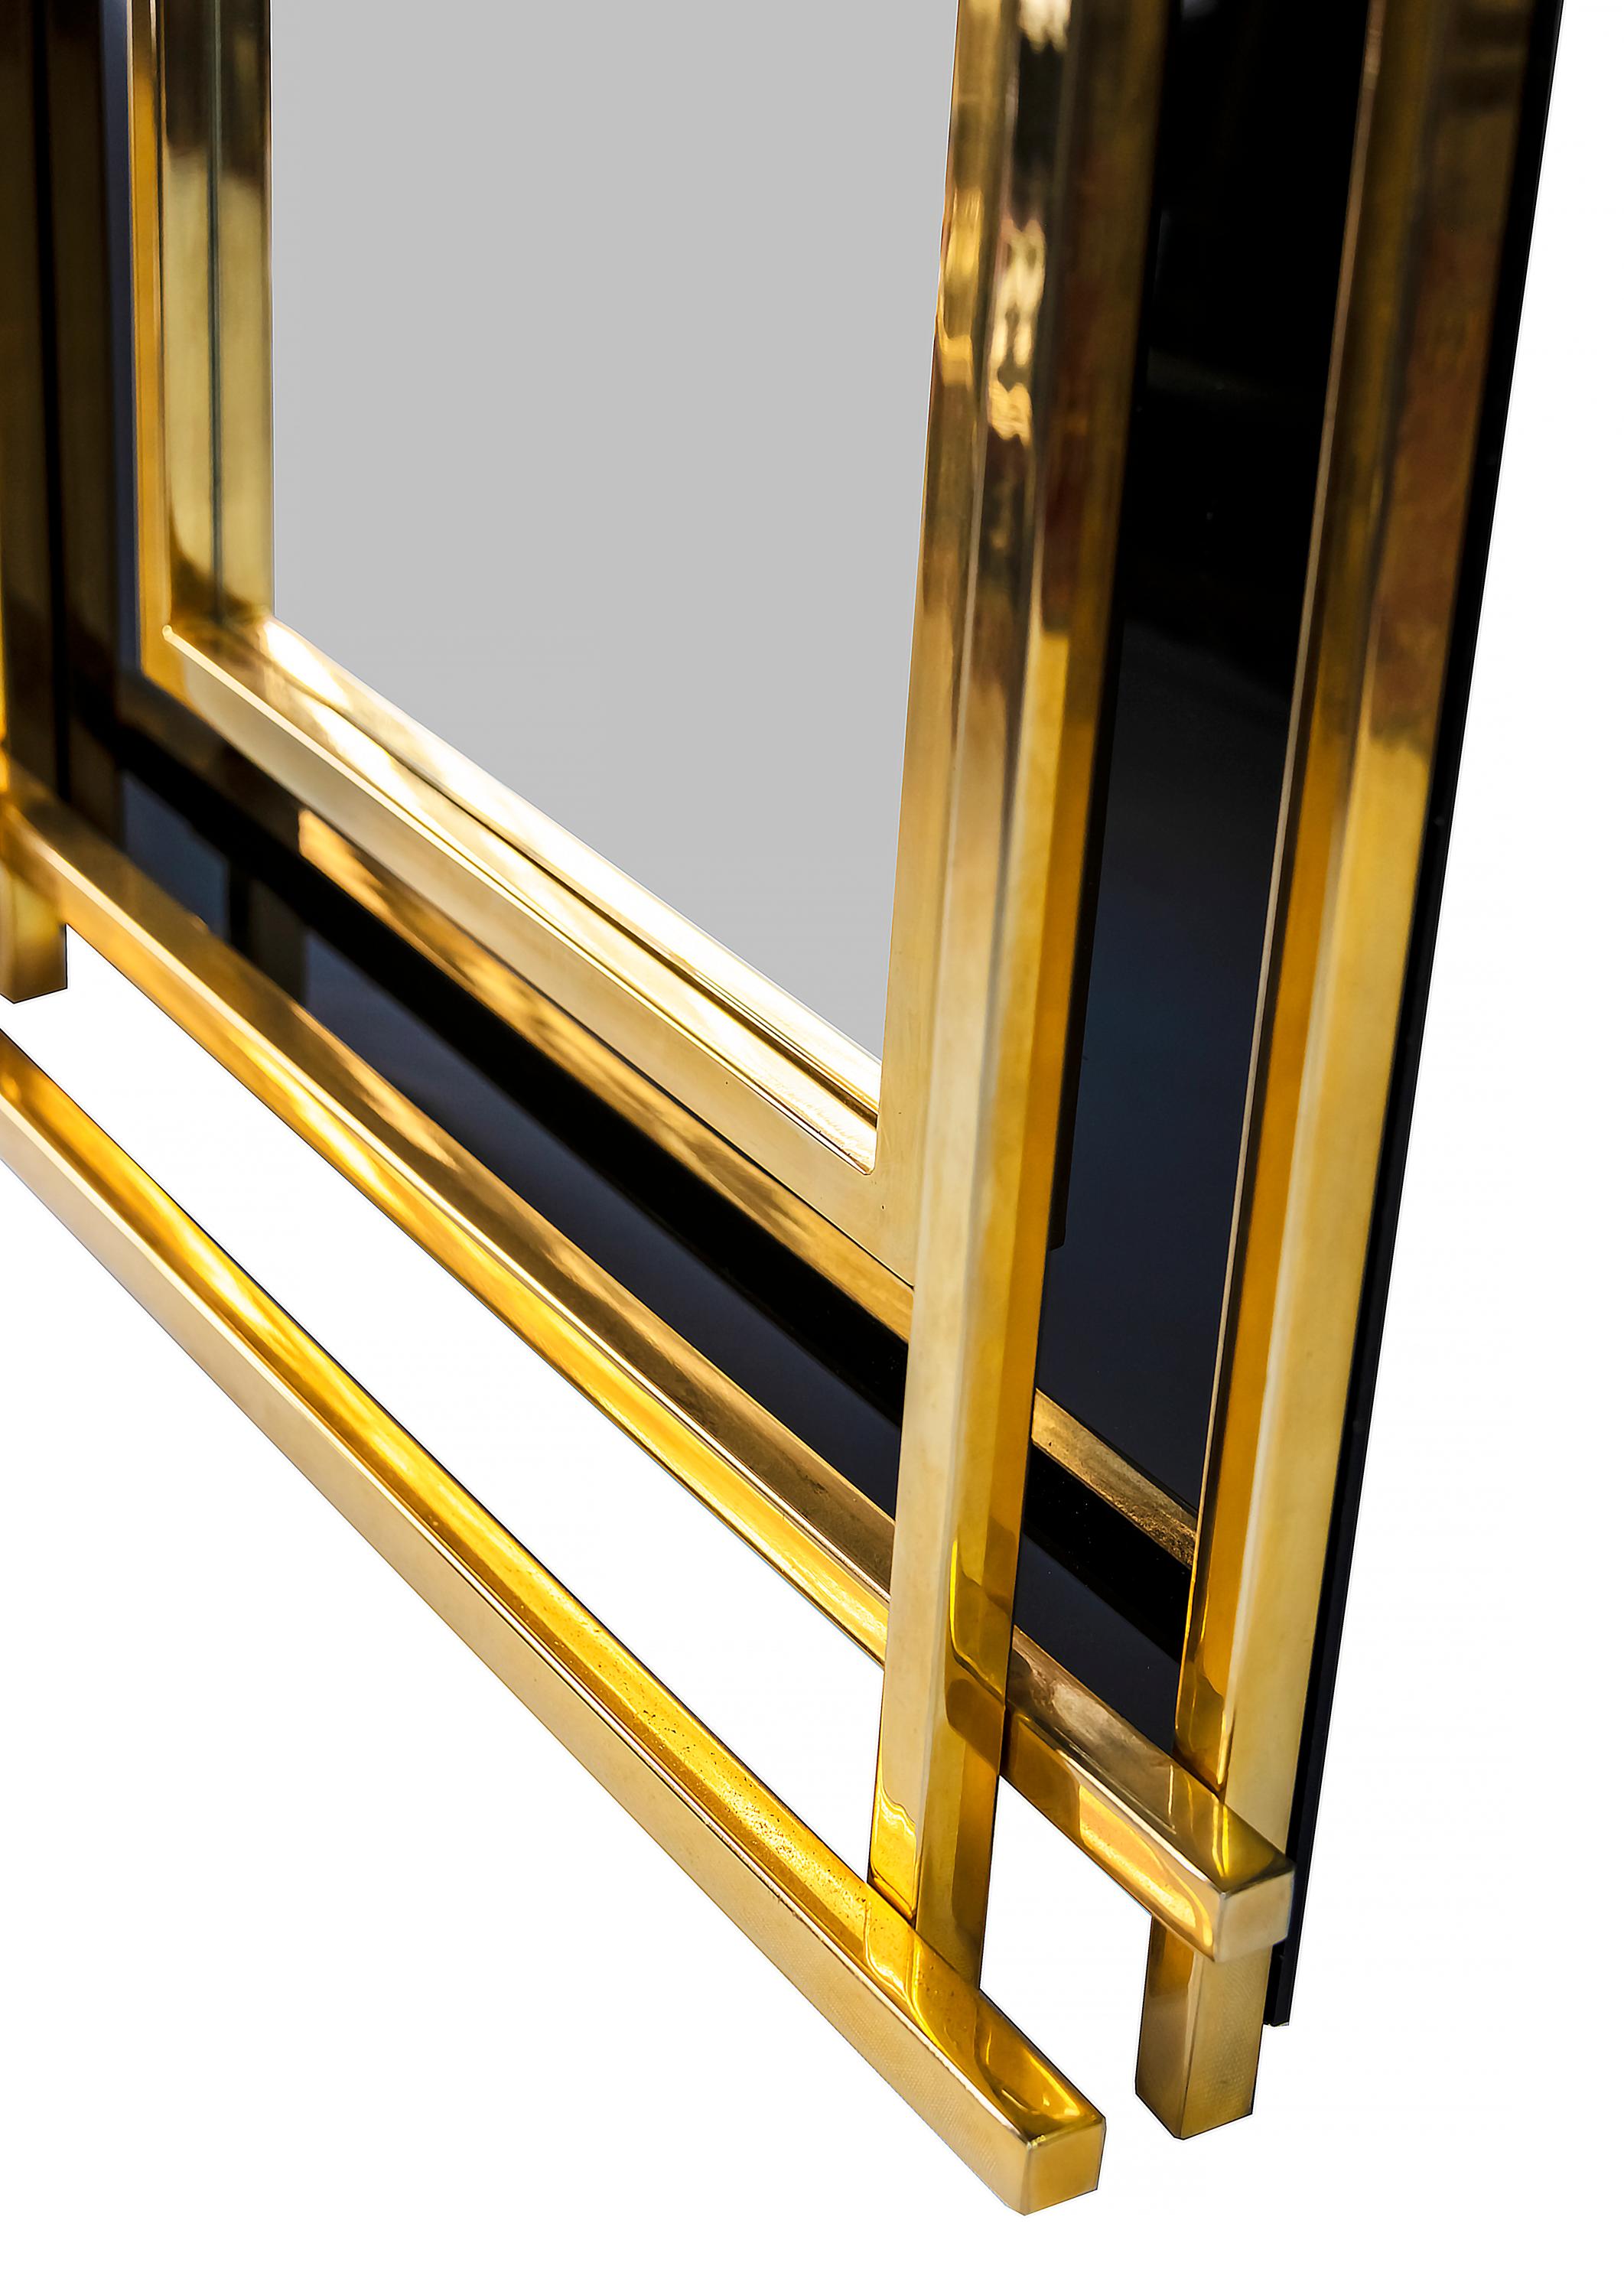 Midcentury Italian Brass and Plexiglass Wall Mirror from 1970s For Sale 3